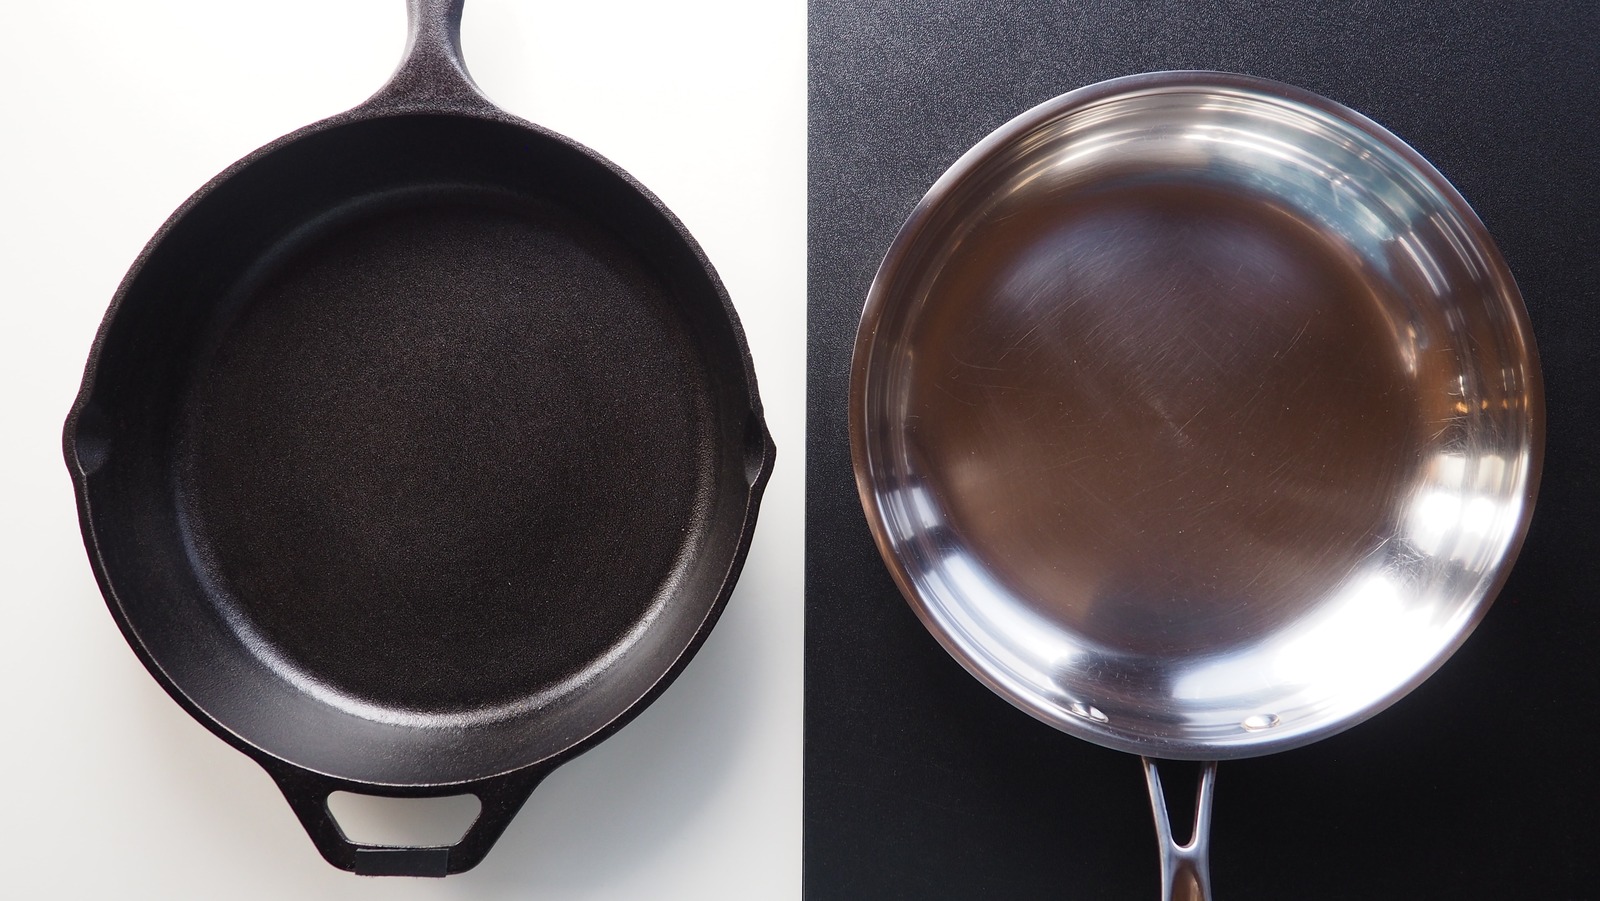 Cast Iron vs. Stainless Steel: Which Is Best for Your Kitchen?